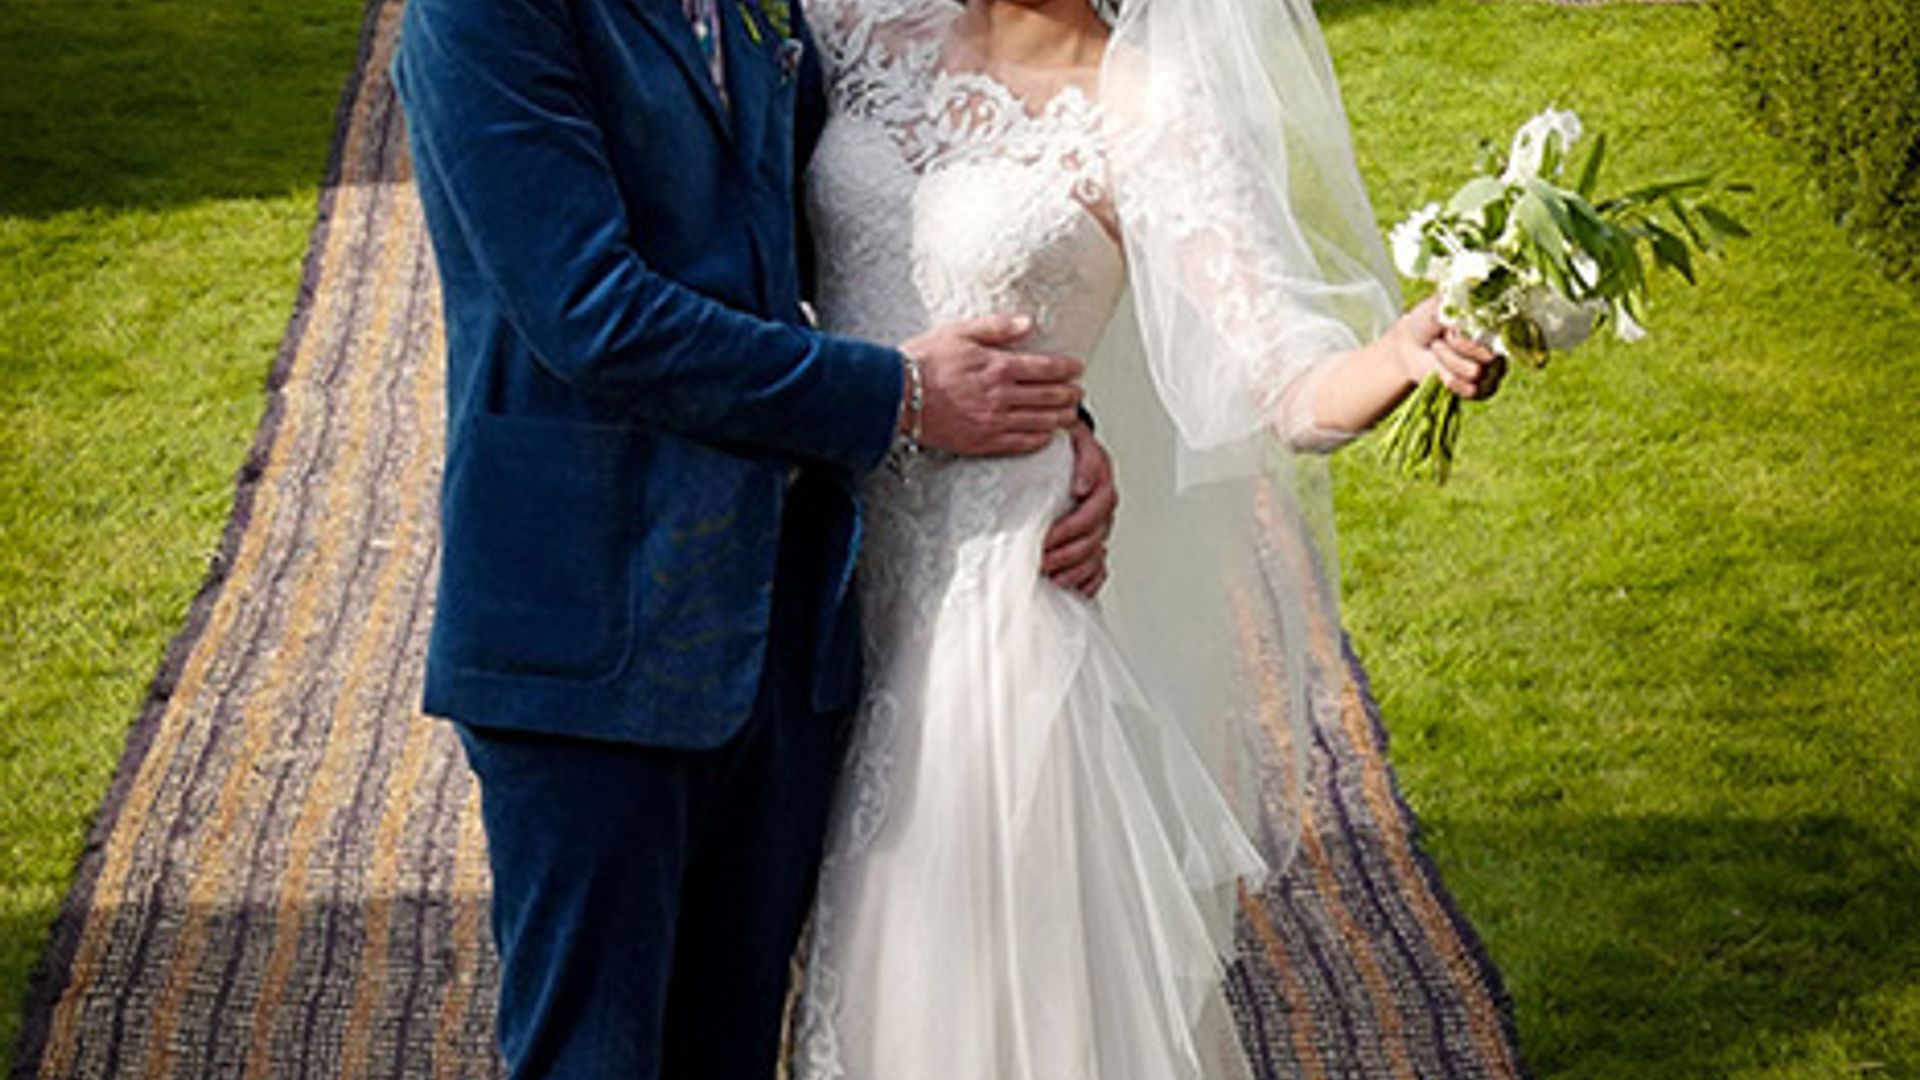 James Jagger and Anoushka Sharma celebrate marriage with second ceremony in the English countryside